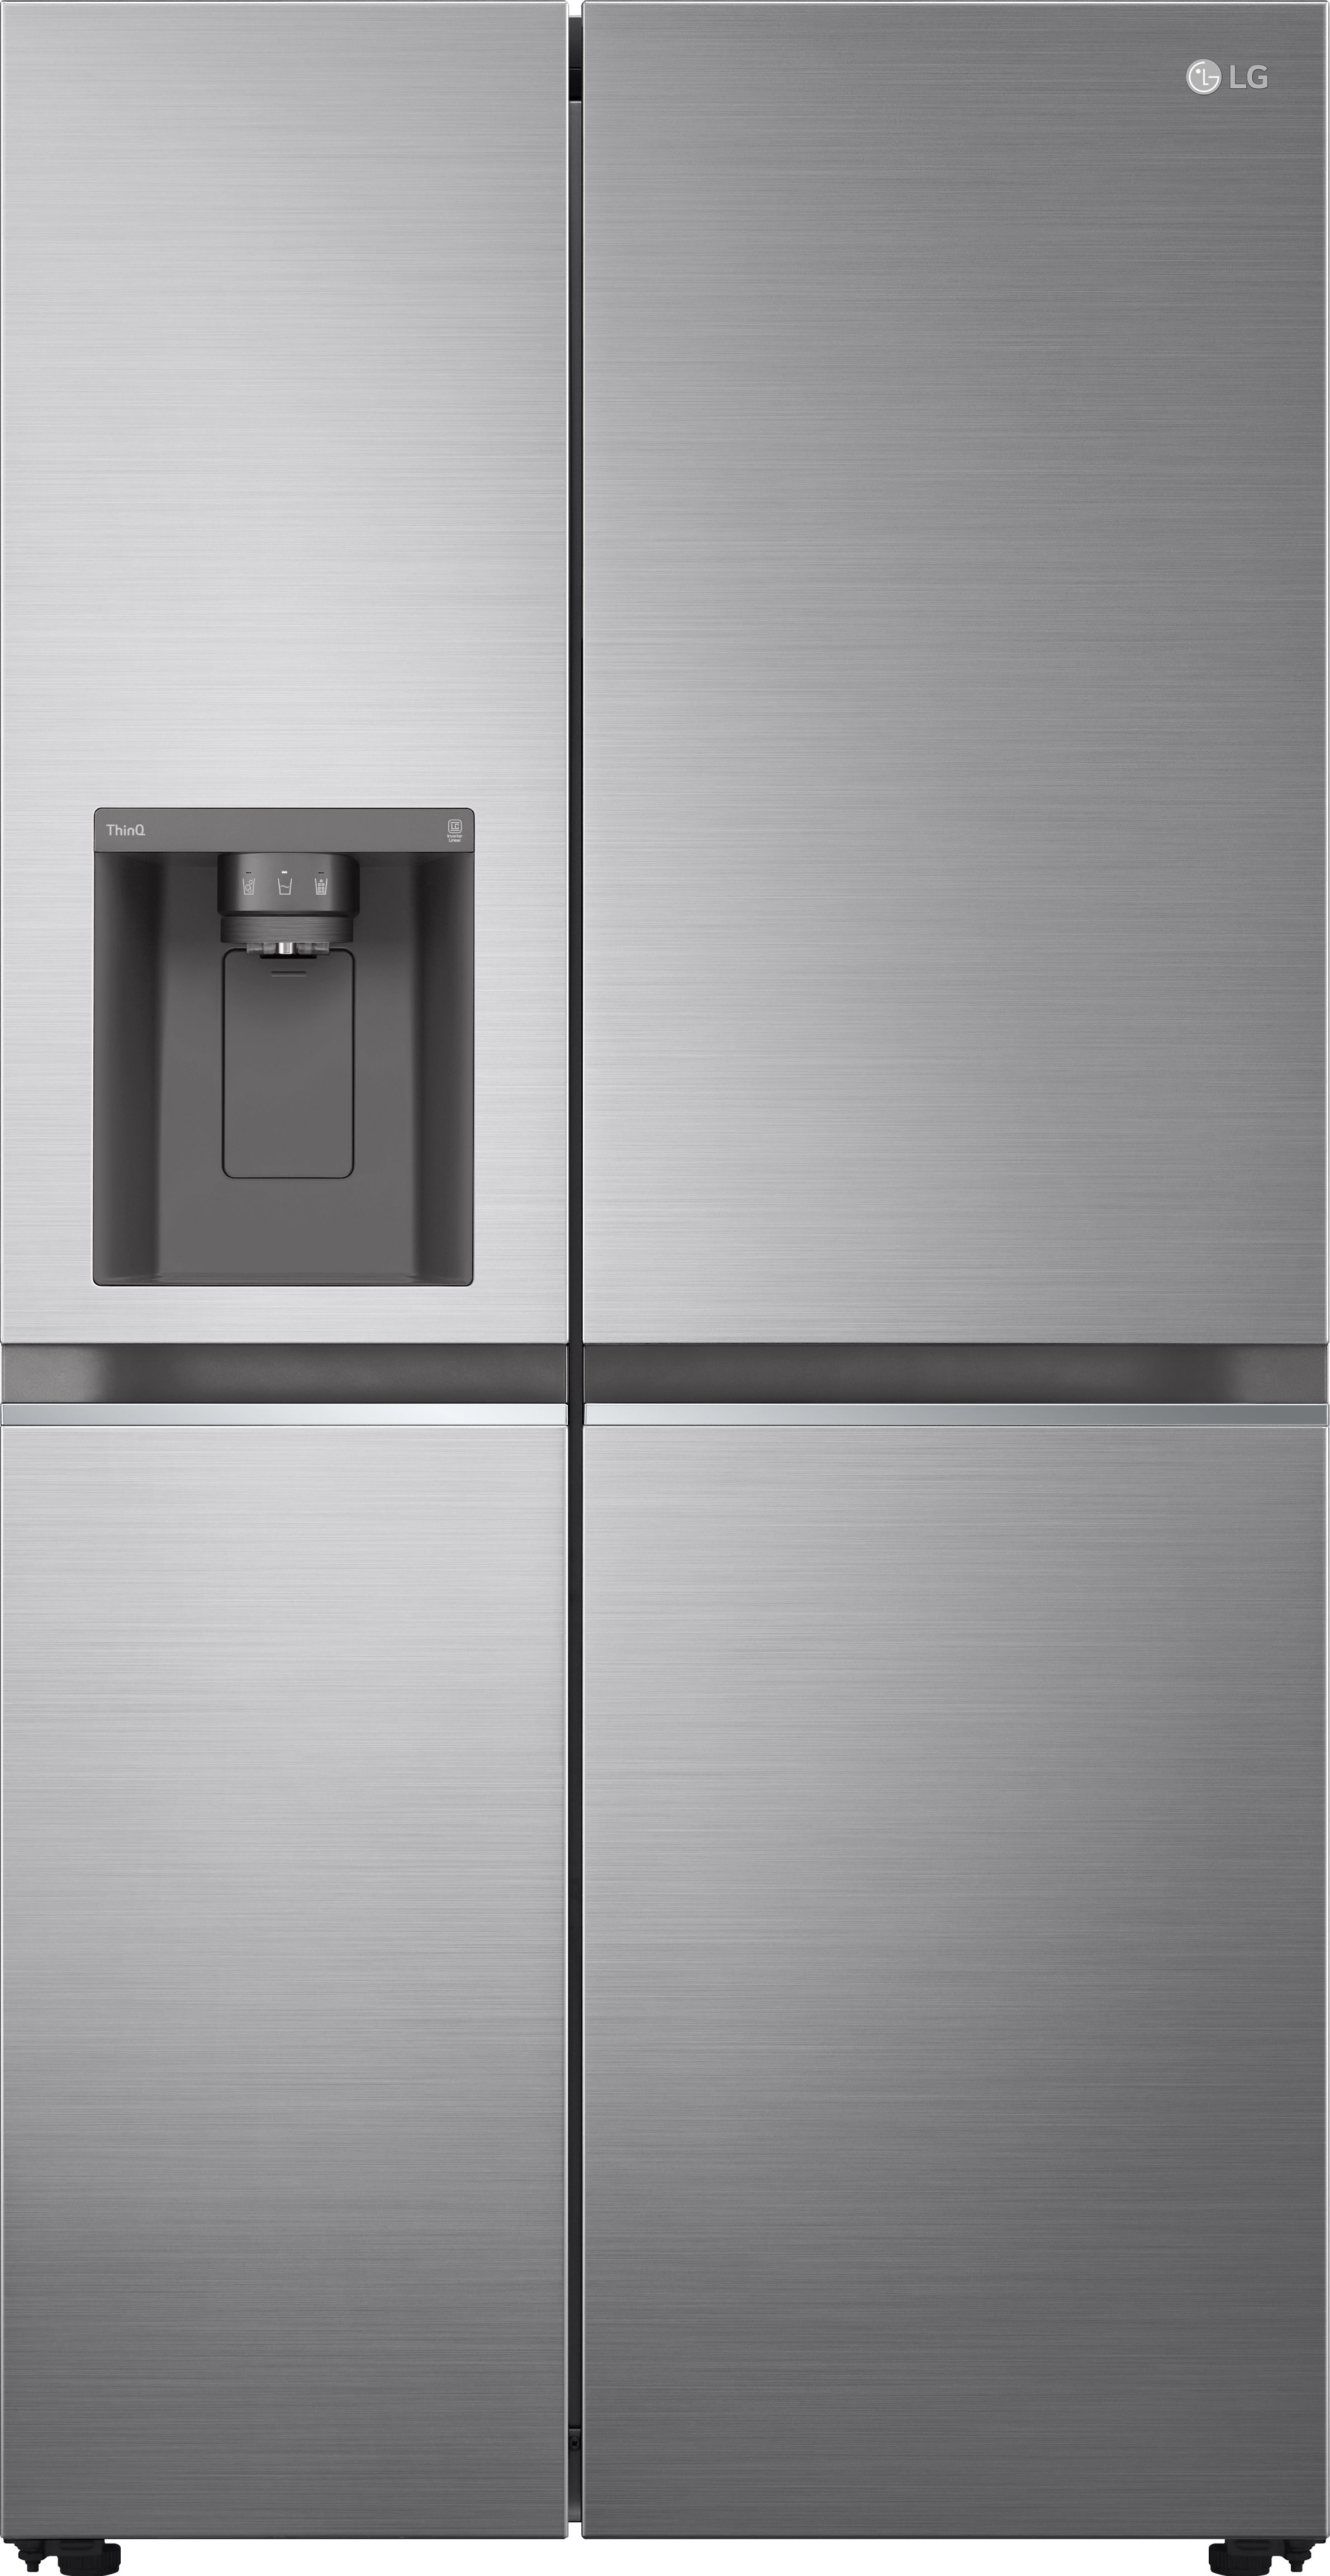 LG NatureFRESH GSLA81PZLD Wifi Connected Non-Plumbed Frost Free American Fridge Freezer - Shiny Steel - D Rated, Silver